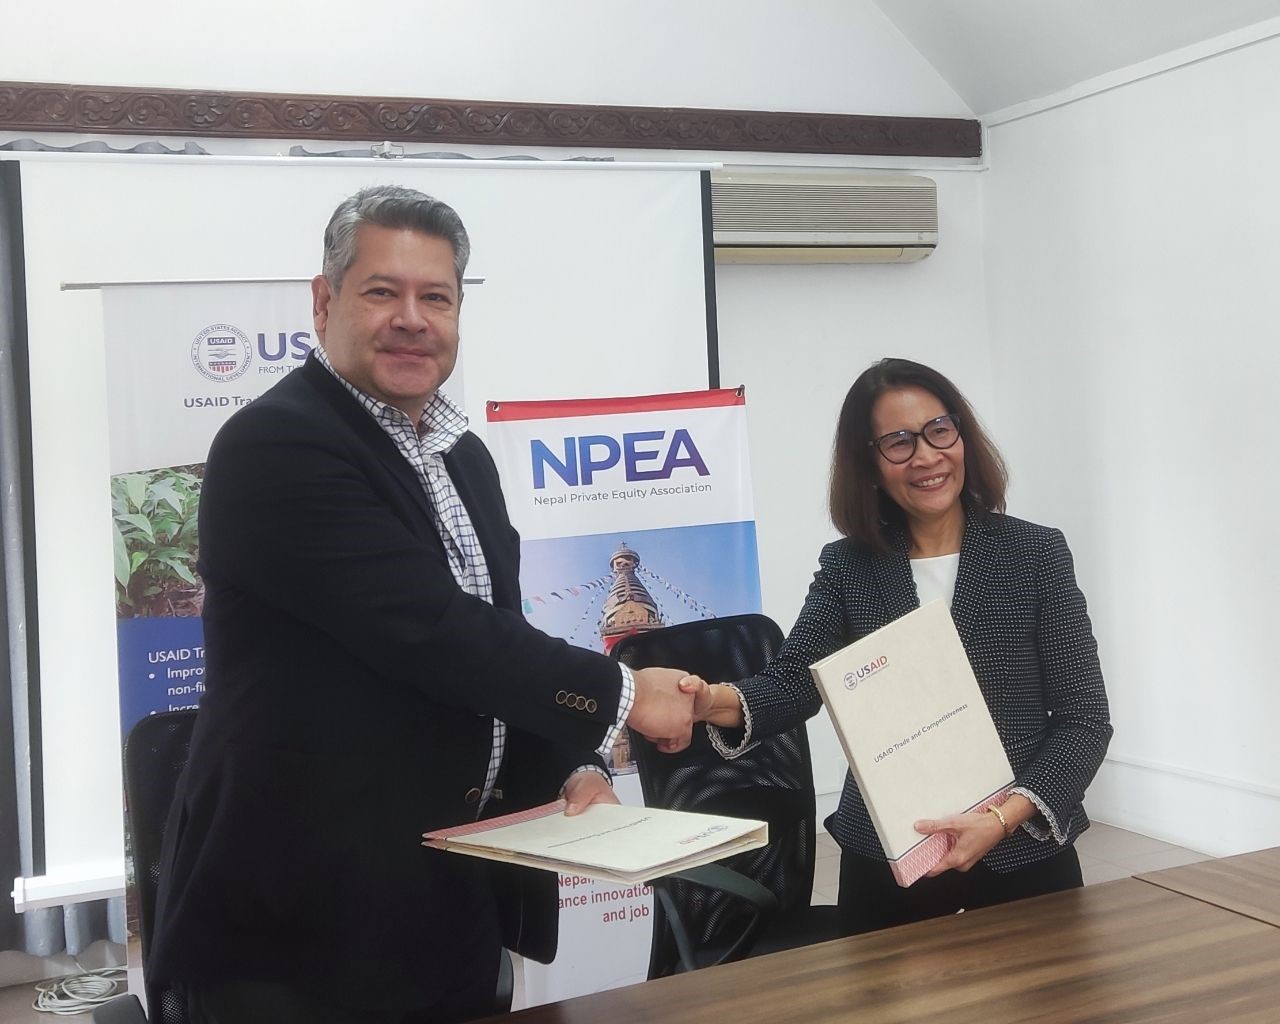 Letter of cooperation signed between NPEA and USAID